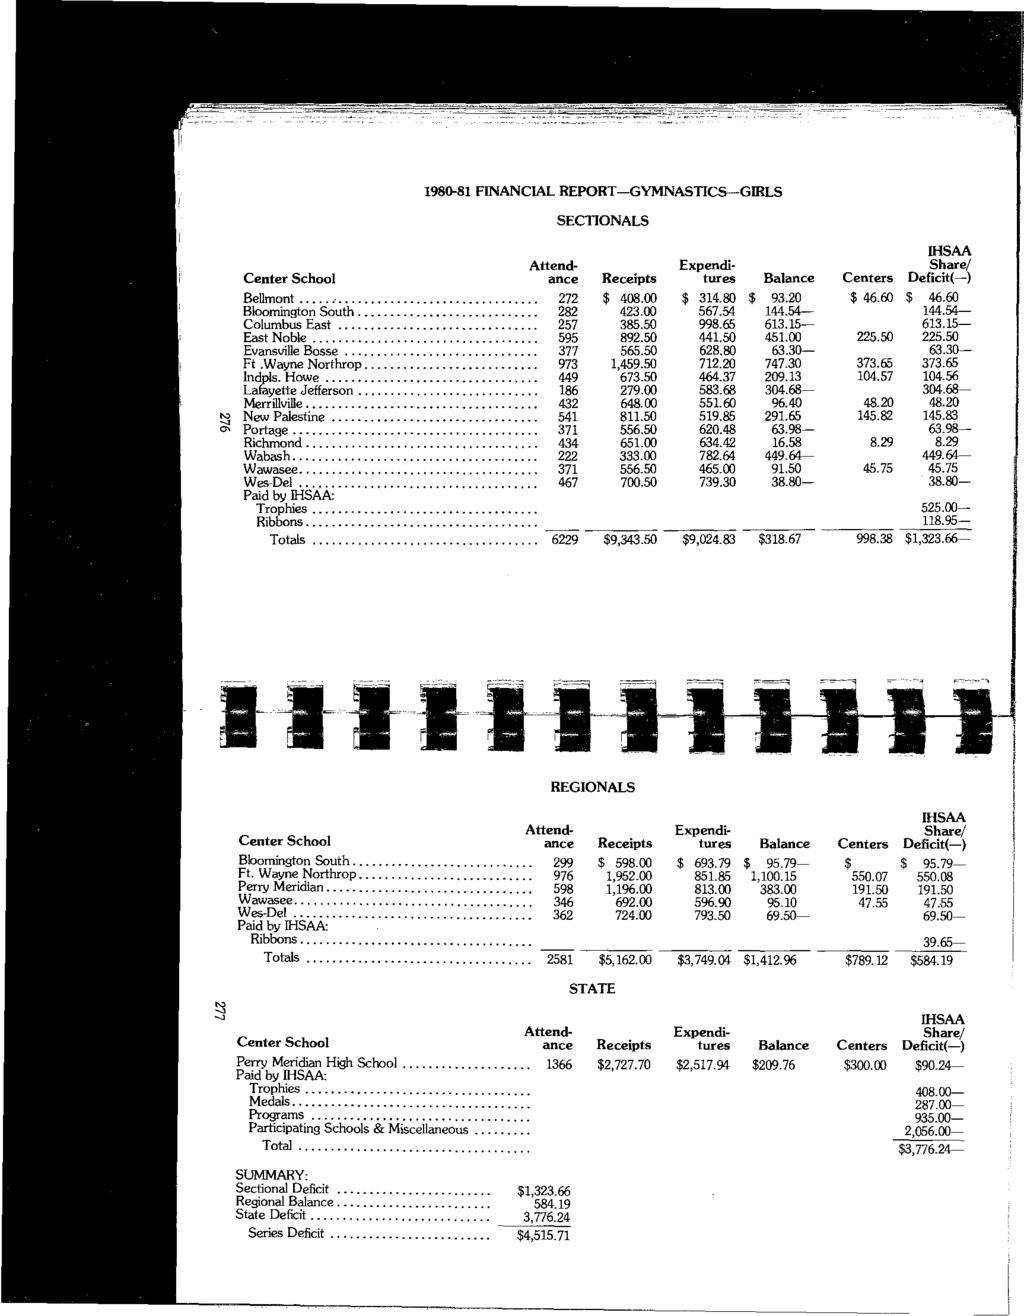 1980-81 FINANCIAL REPORT-GYMNASTICS-GIRLS SECTIONALS Attend- Center School ance Receipts Bellmont....:... 272 $ 408.00 Bloomington South... 282 423.00 Columbus East... 257 385.50 East Noble... 595 892.